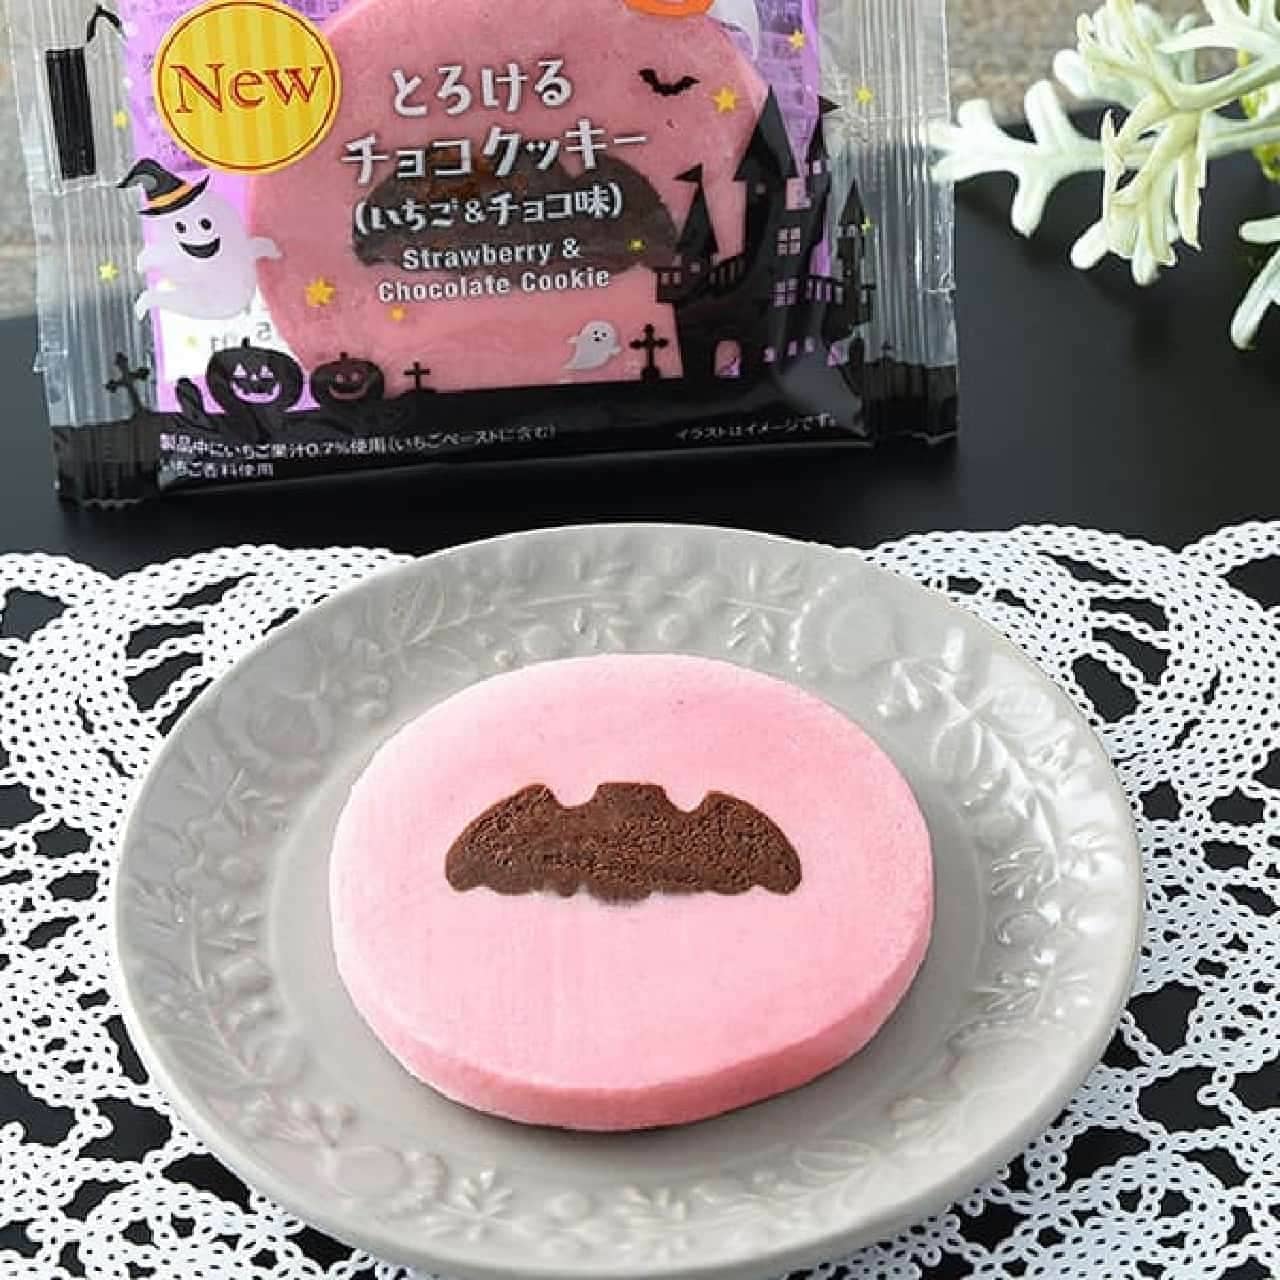 FamilyMart "Melted Chocolate Cookie (Strawberry & Chocolate Flavor)